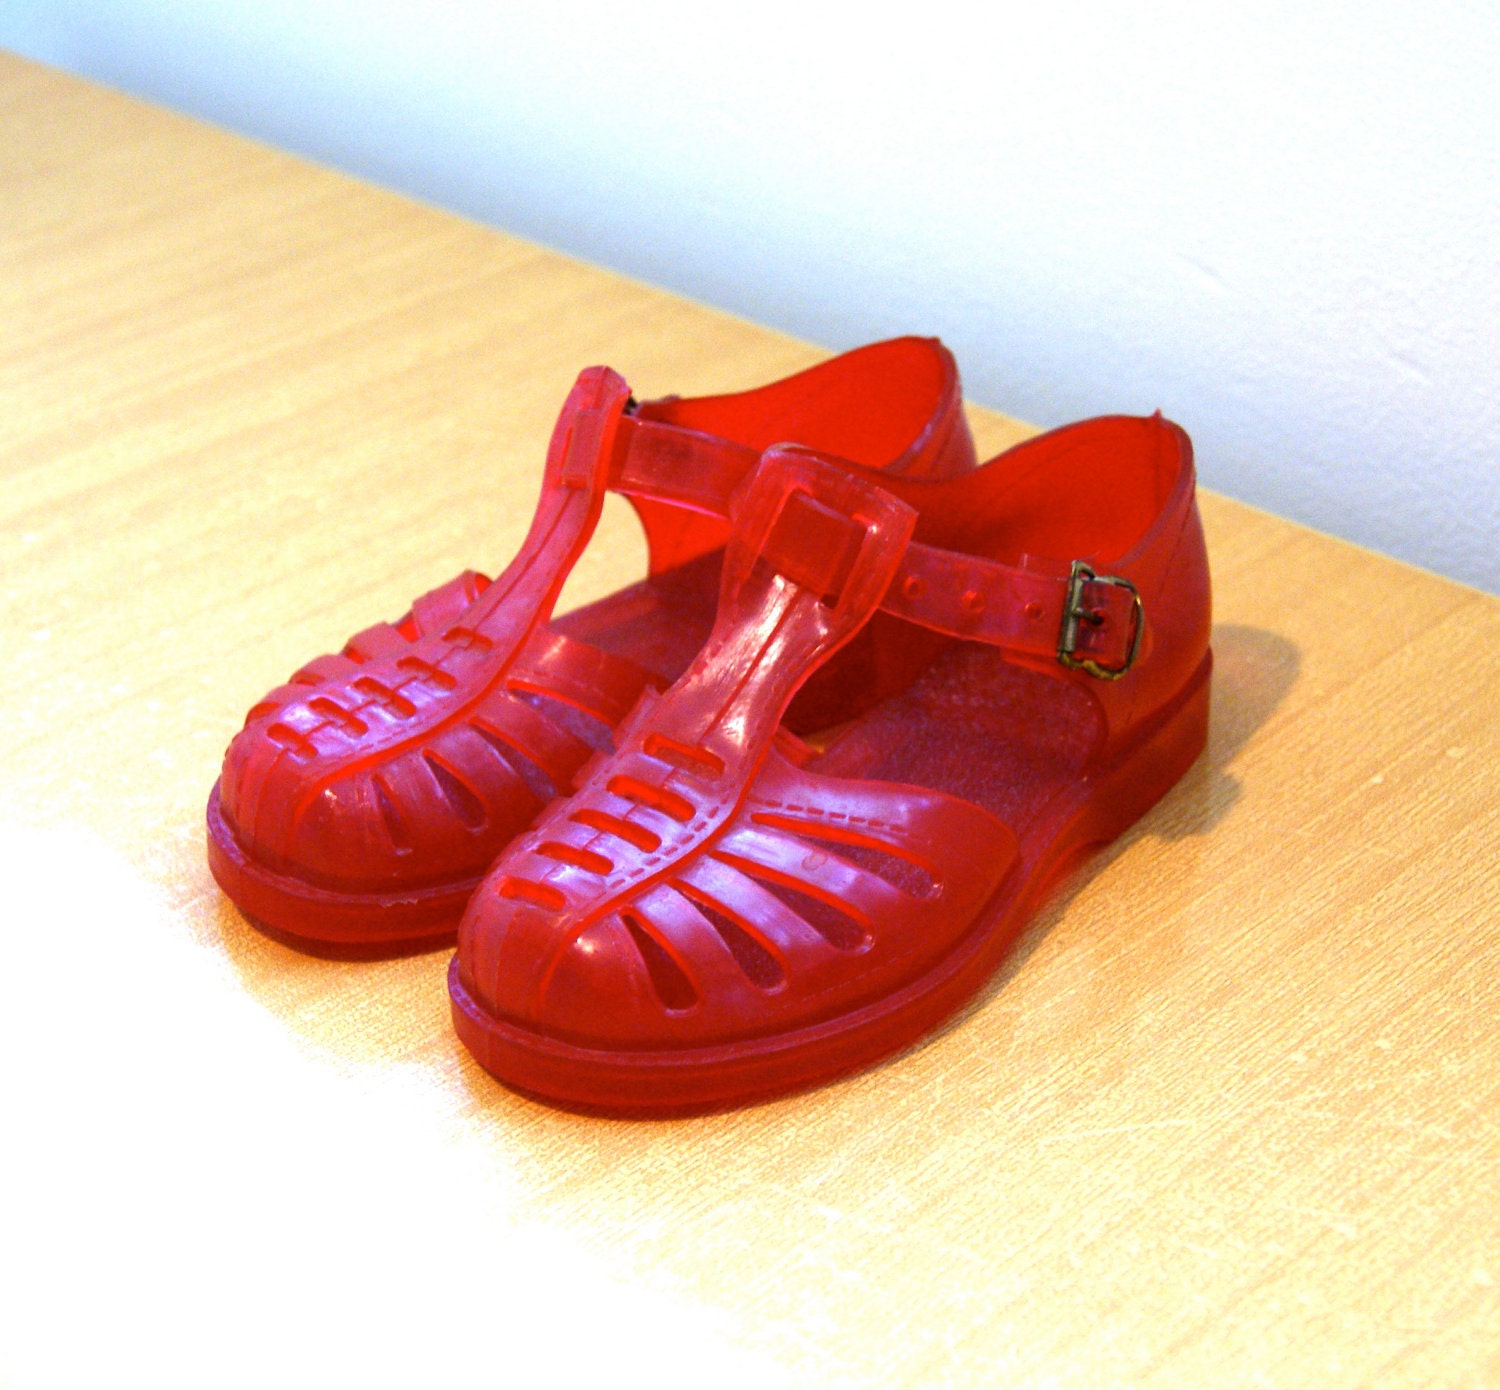 Cherry Red Jelly Sandals for Toddler Vintage by aSilverUnicorn